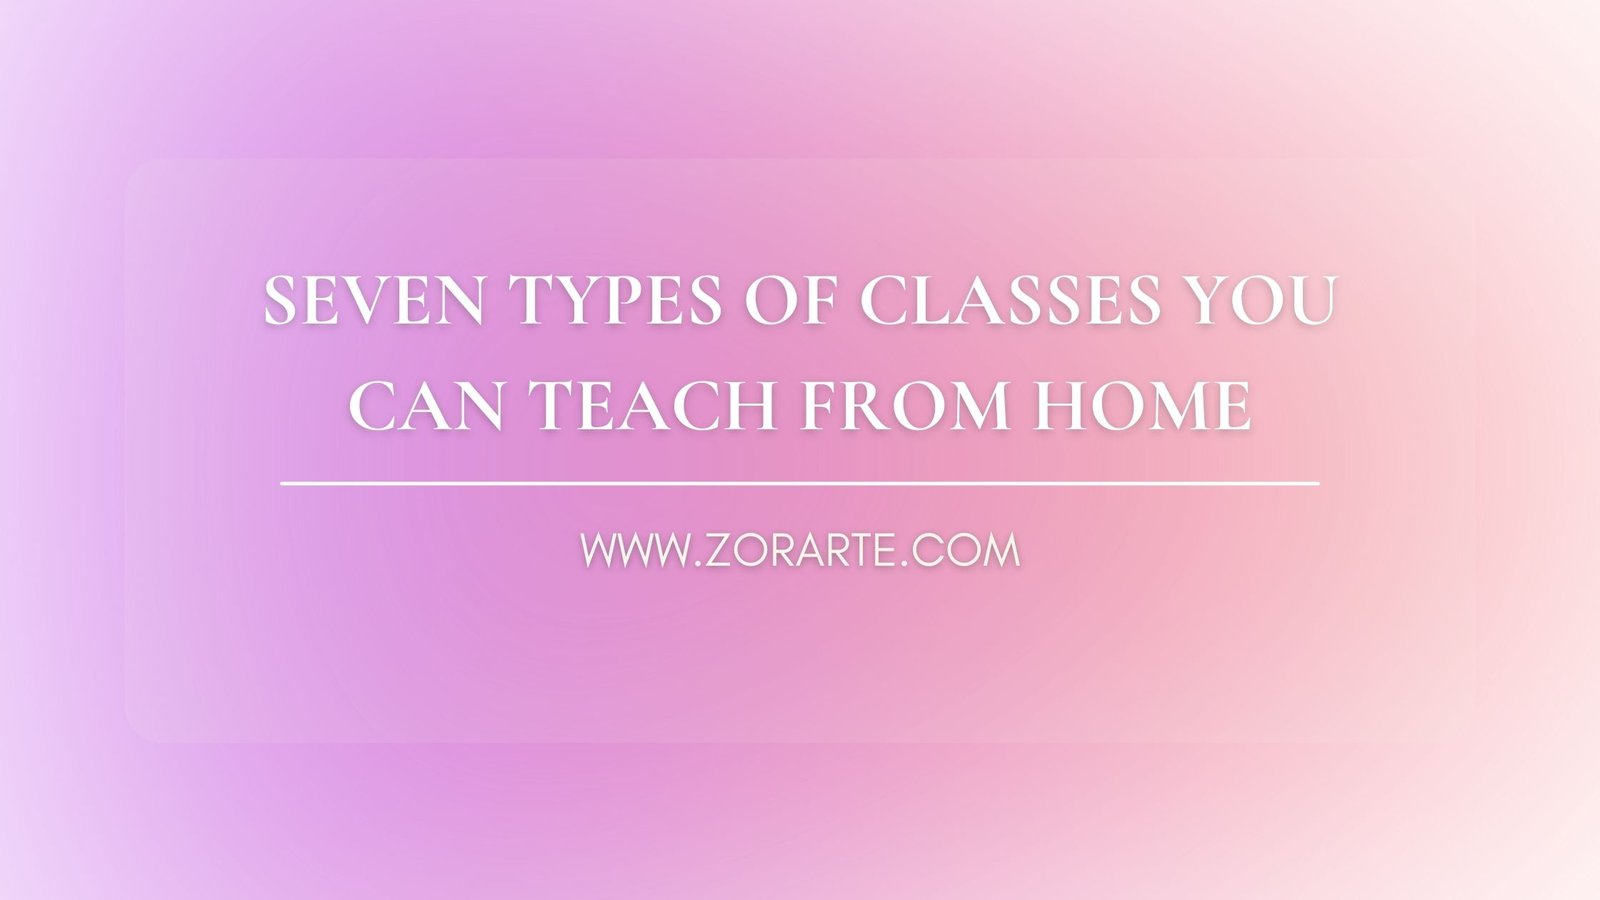 Seven Types of Classes You Can Teach from Home